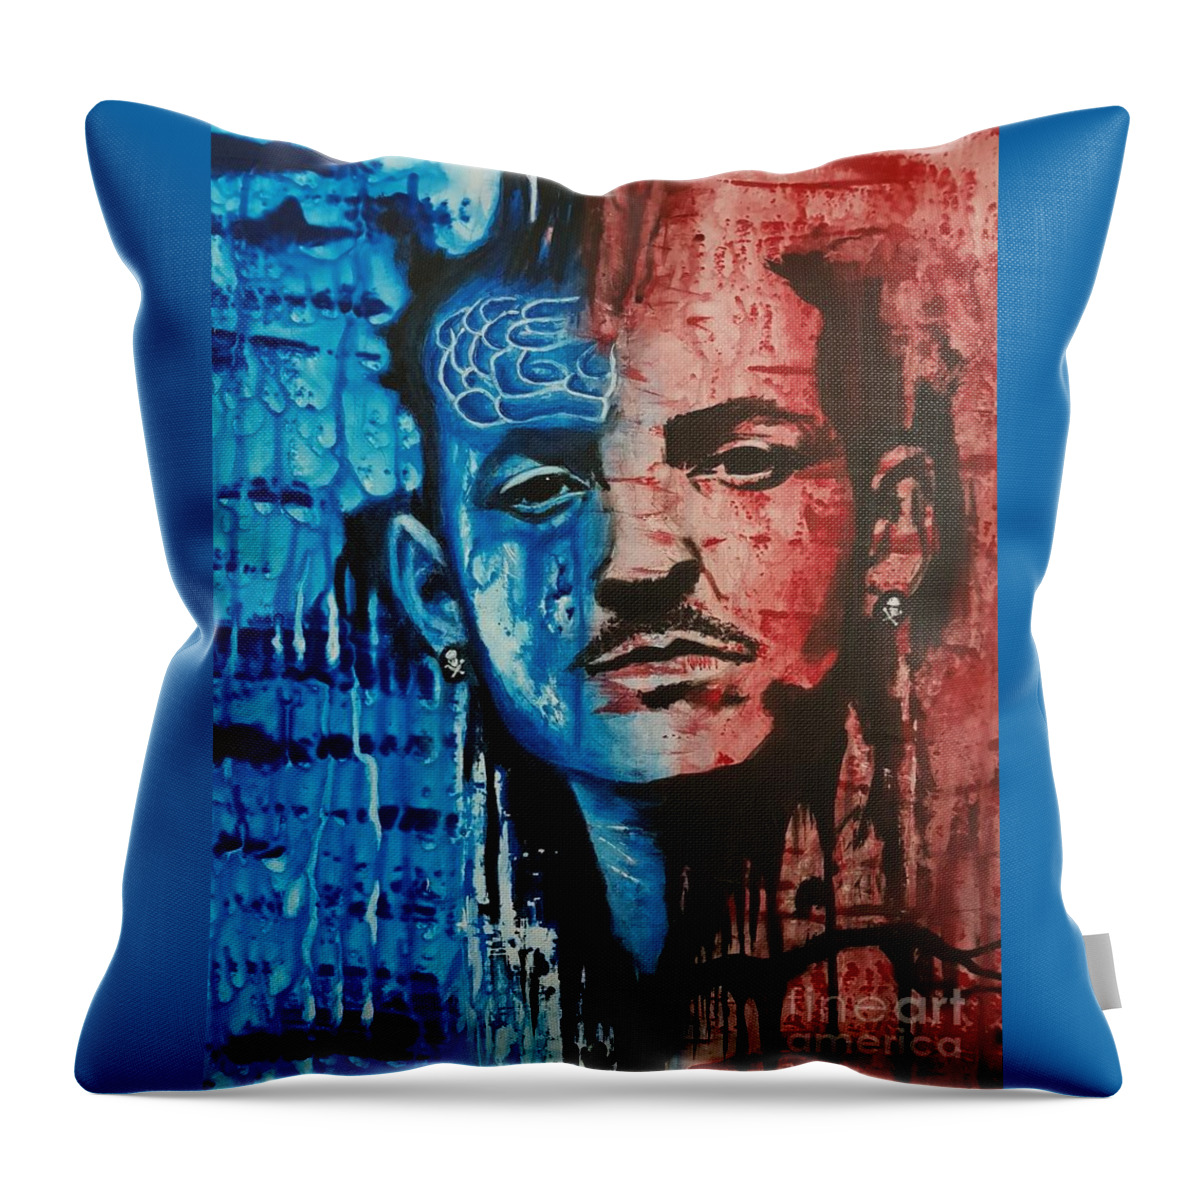 Chester Bennington Throw Pillow featuring the painting Heavy Thoughts by Cassy Allsworth